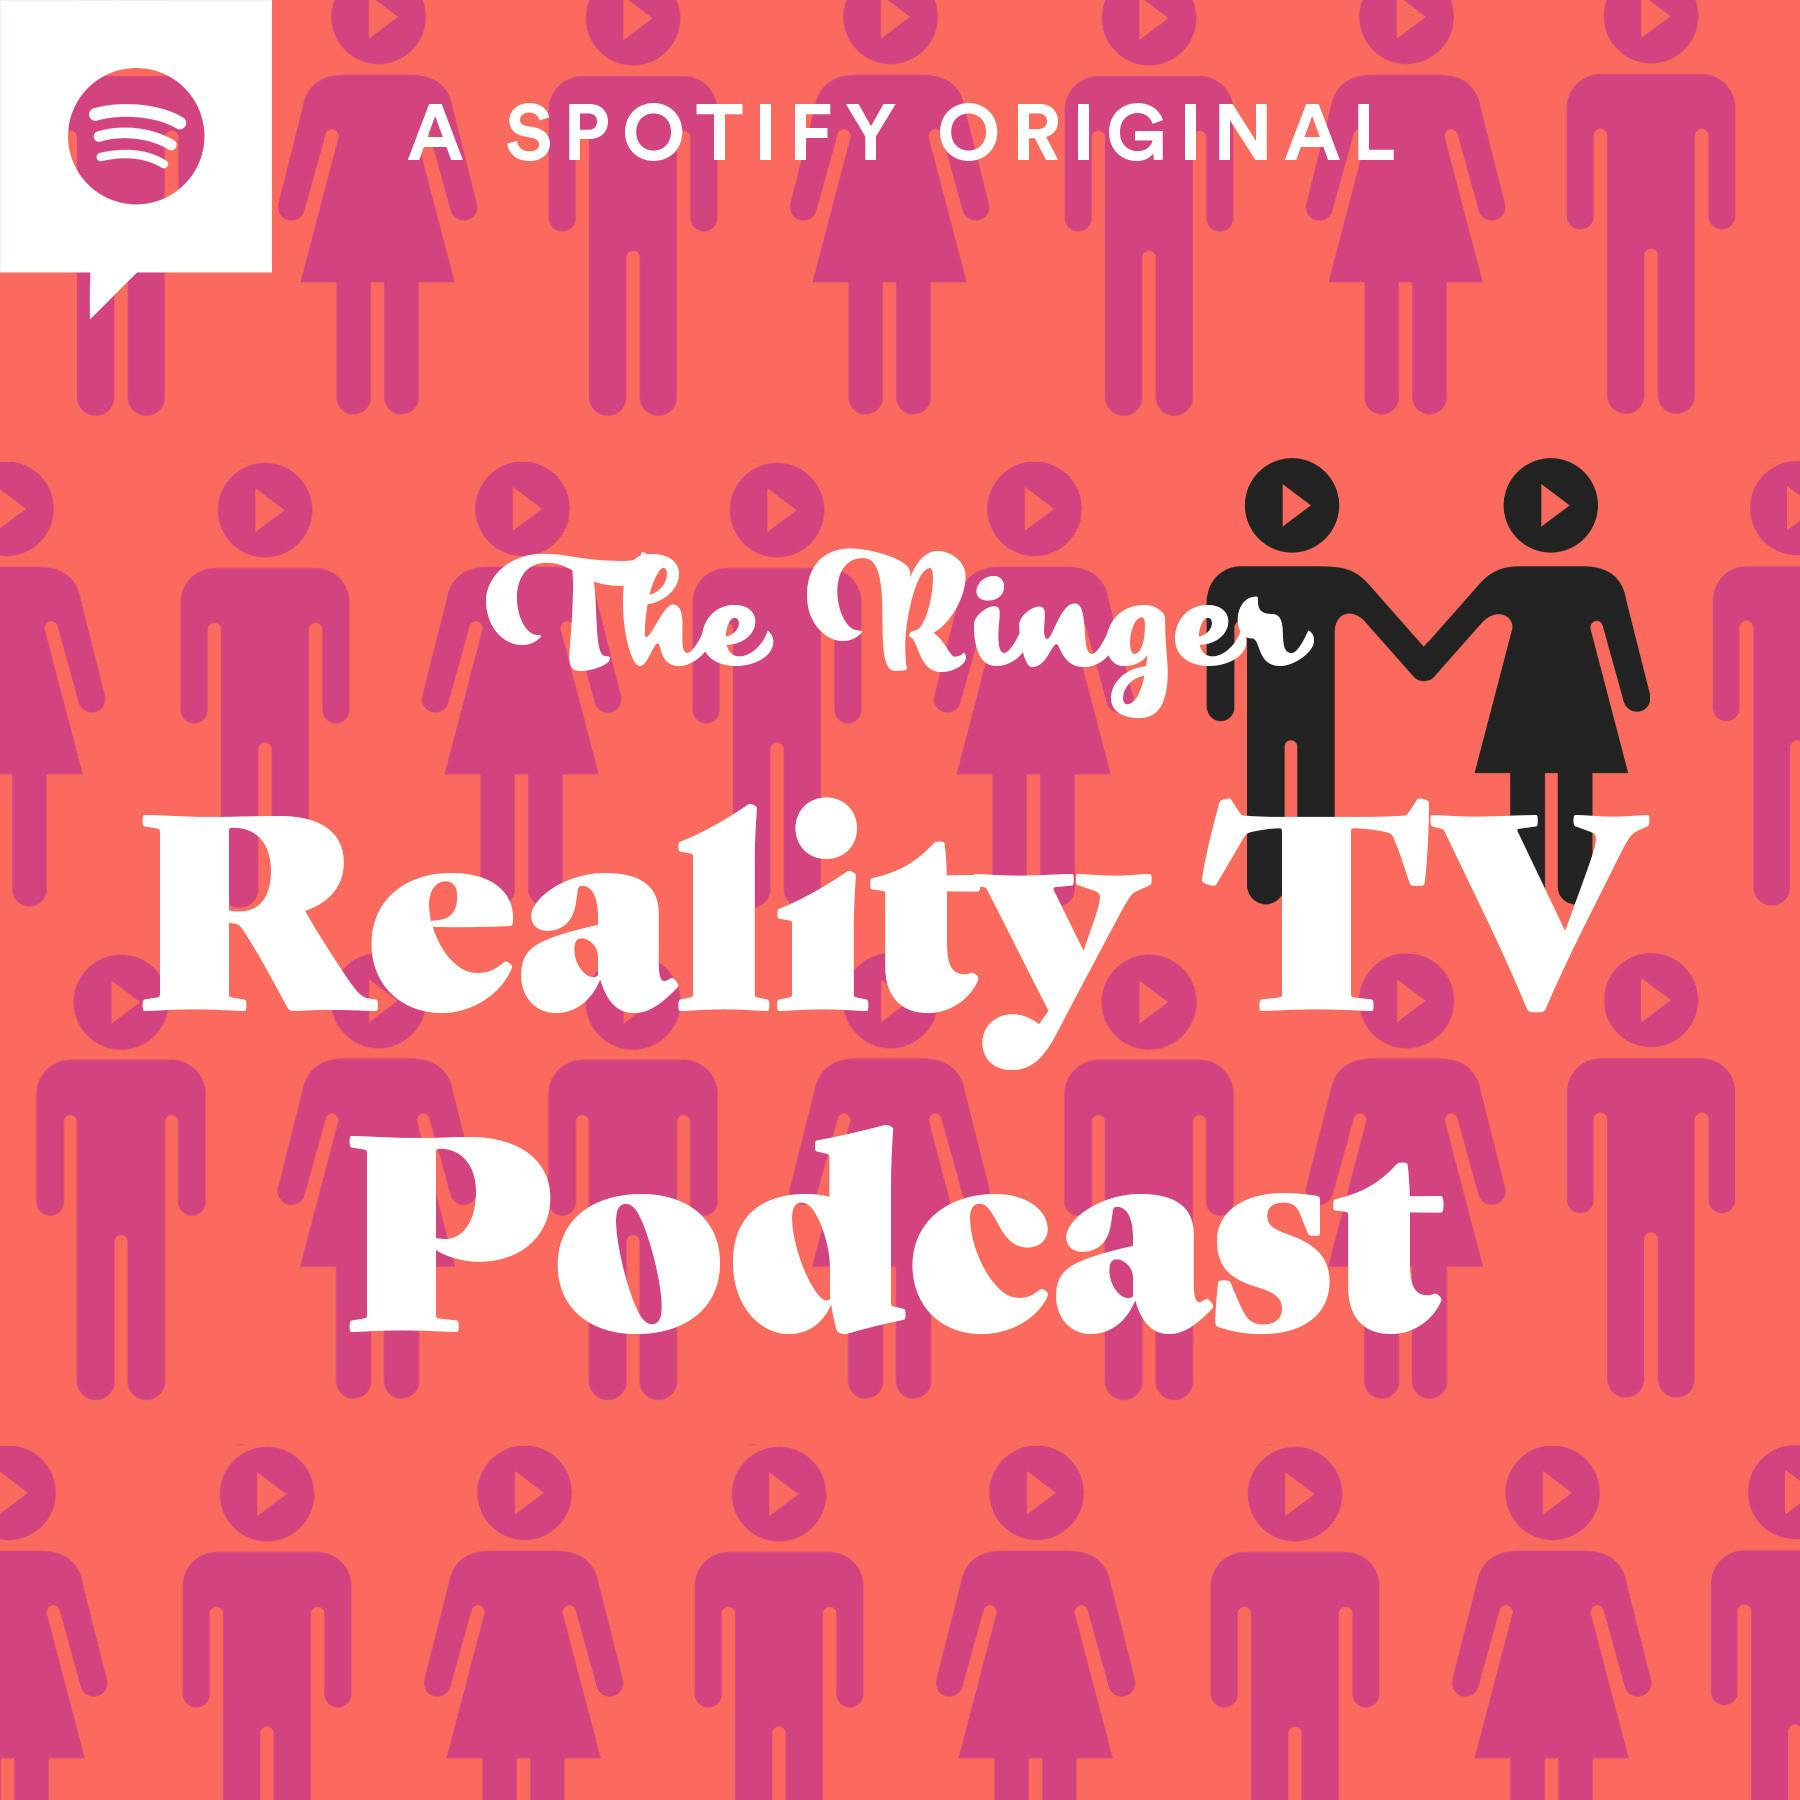 The Ringer Reality TV Podcast podcast show image